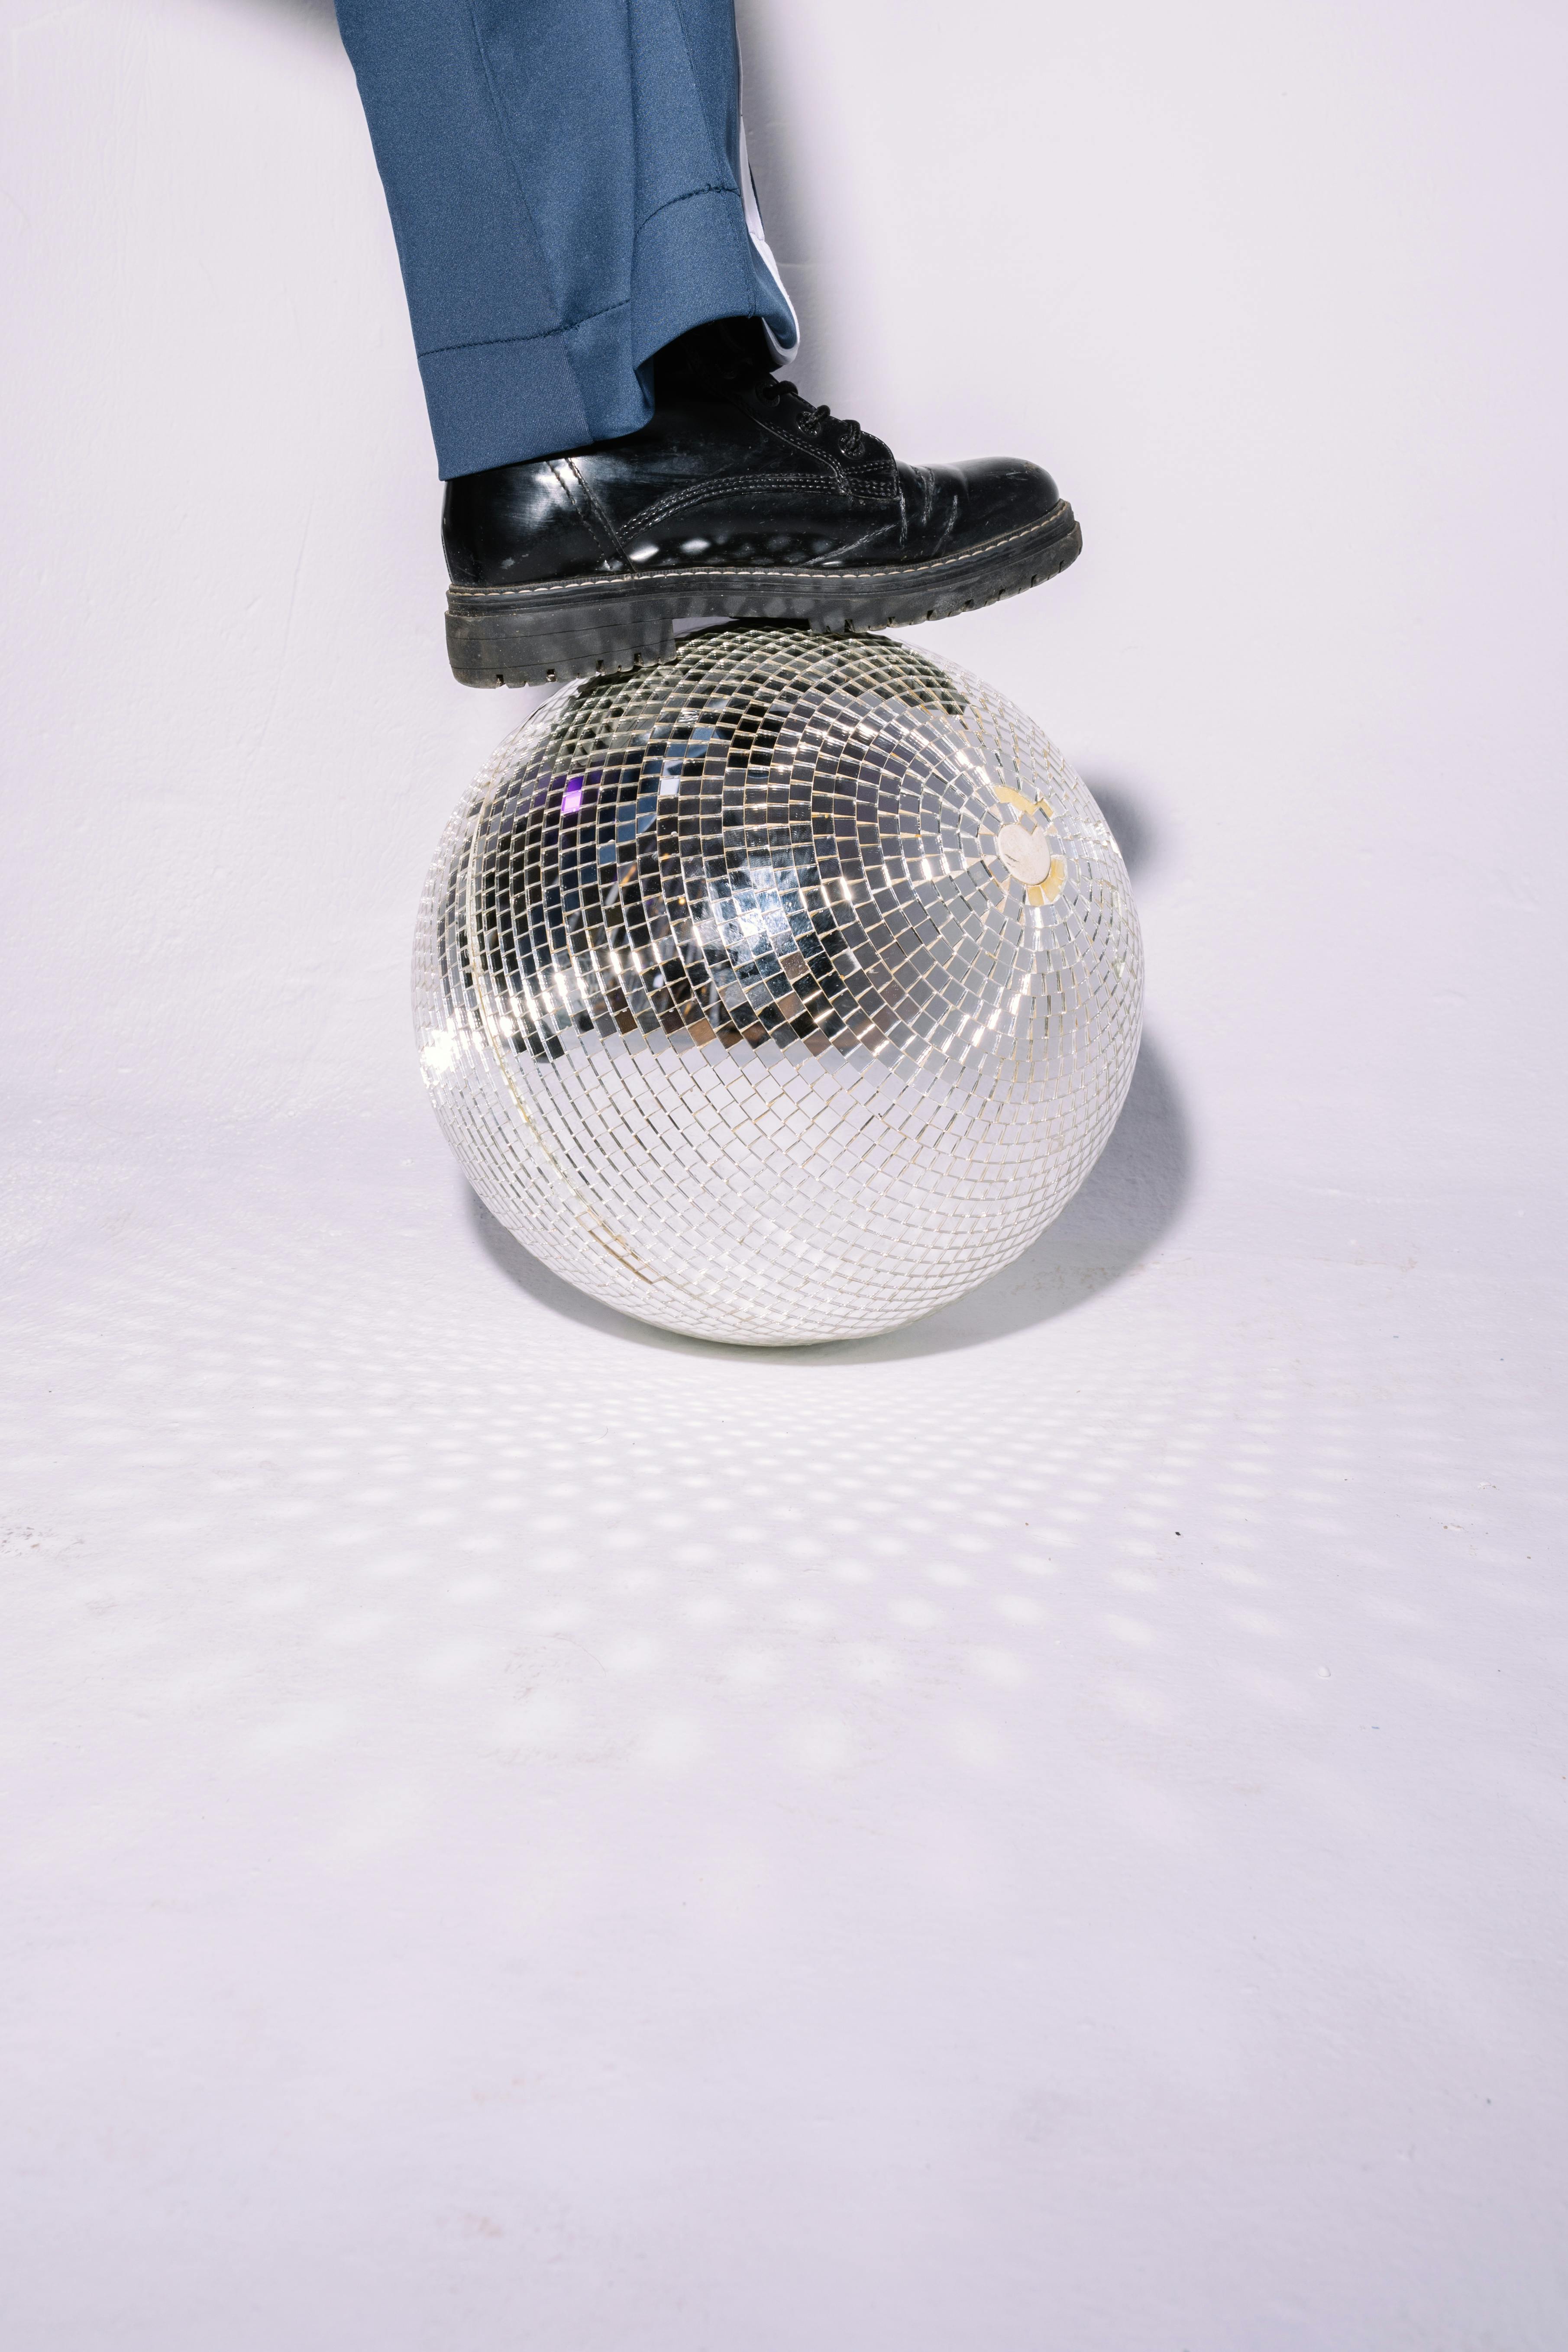 photo of a person stepping on a disco ball